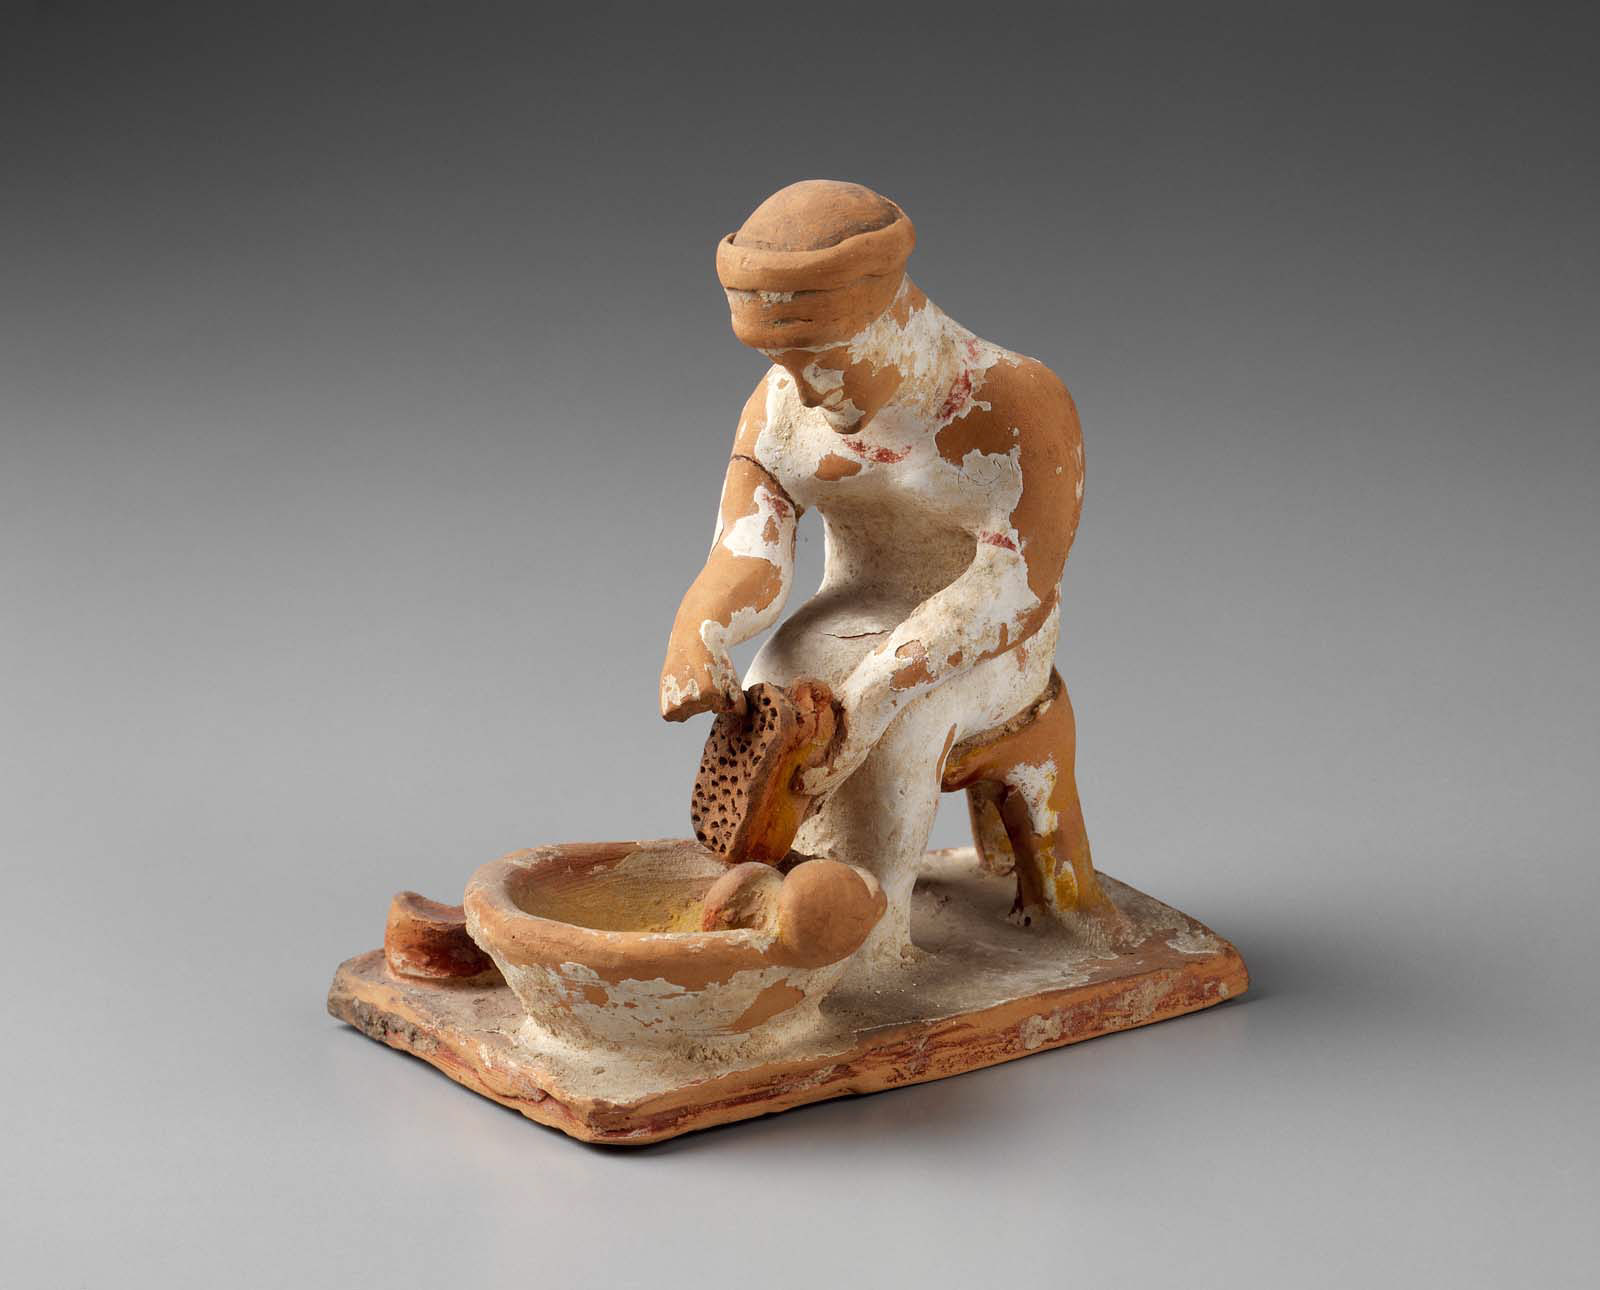  Woman grating cheese - Greek -Late Archaic Period -Early 5th century B.C.